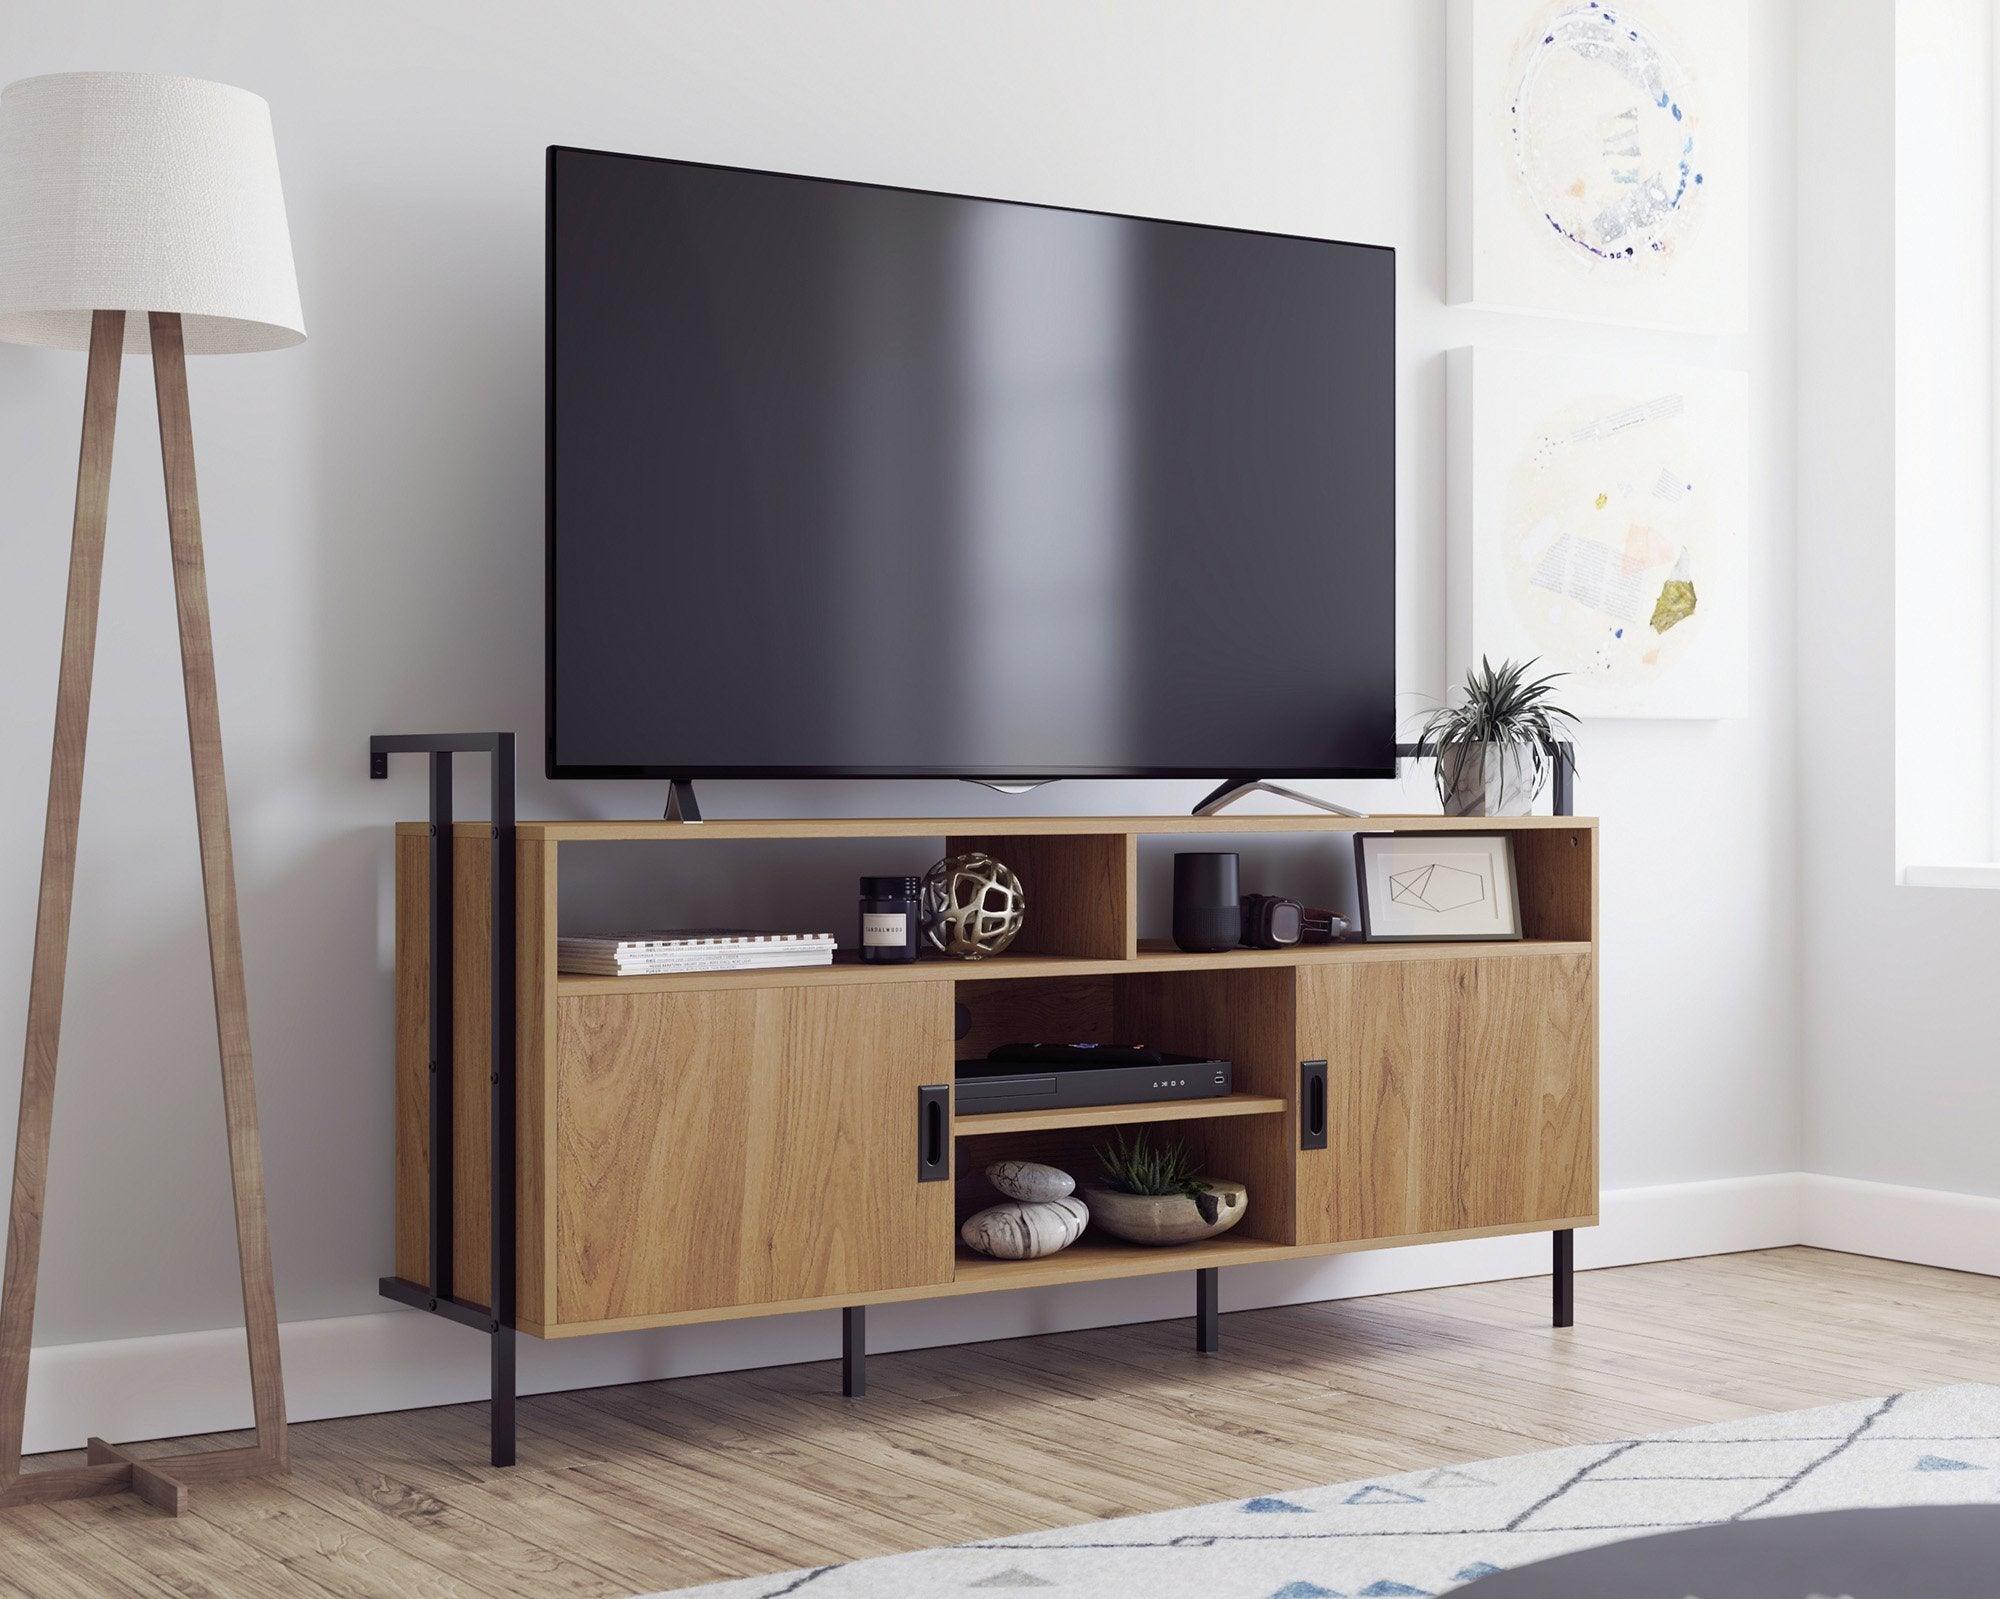 Hythe wall mounted tv stand credenza - crimblefest furniture - image 1